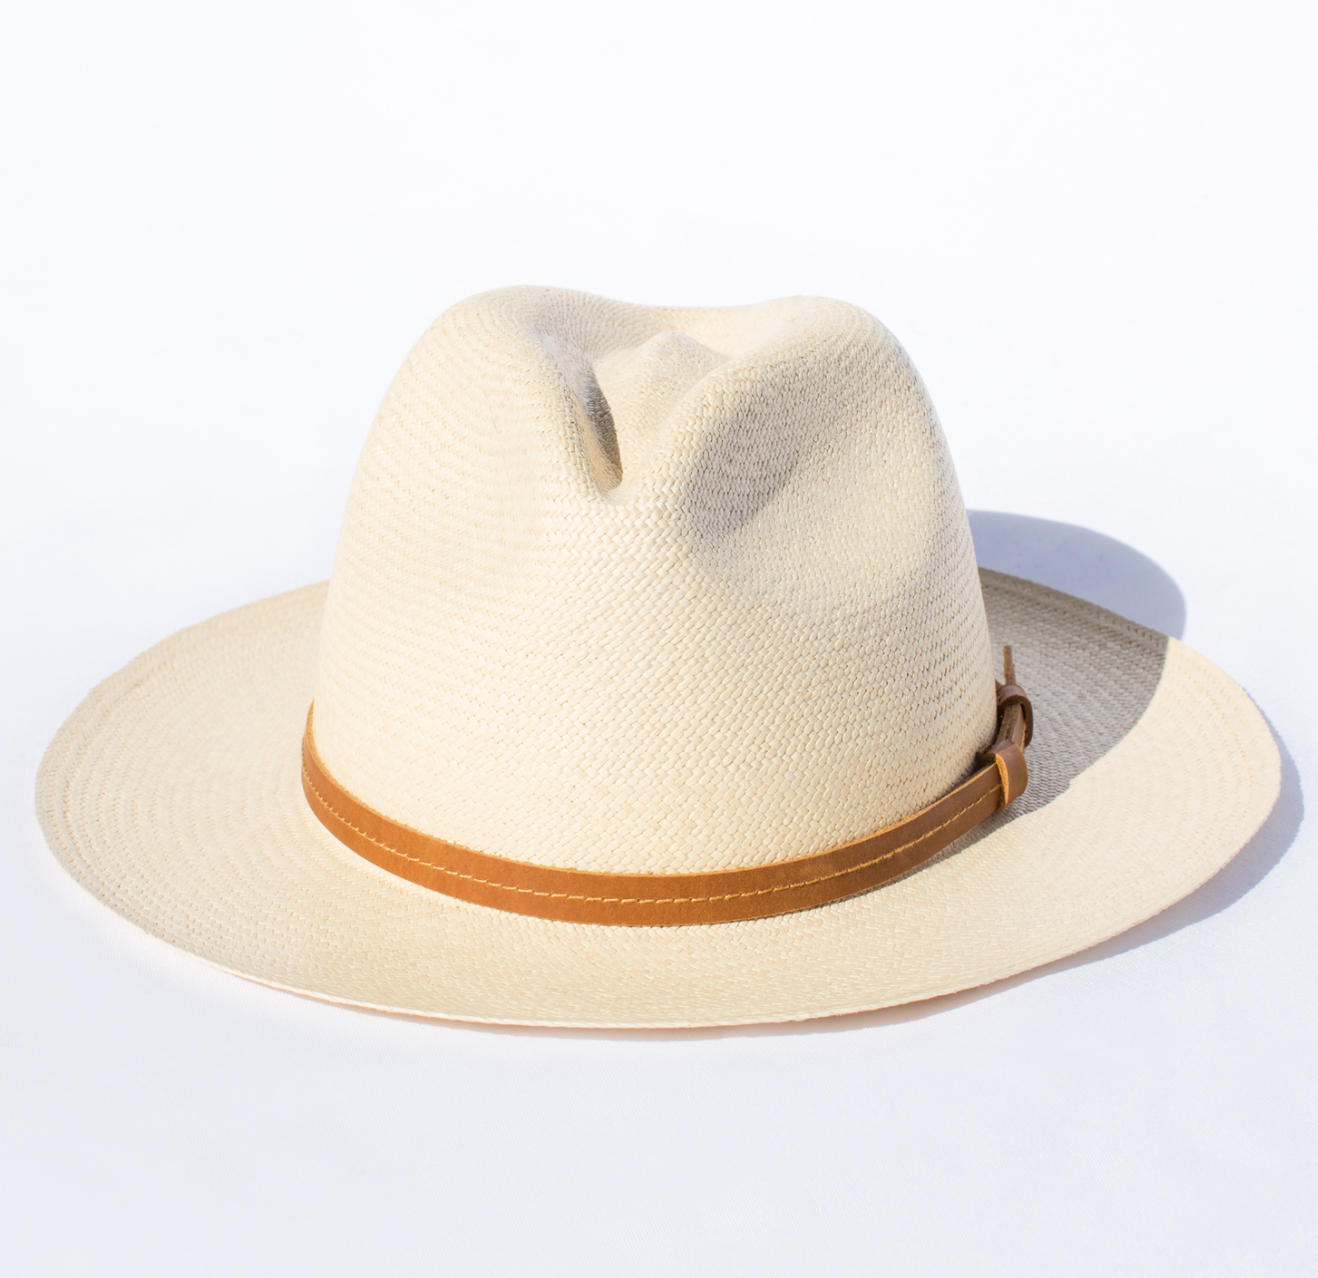 Elegancia Tropical Hats- Classic Natural Panama Hat with Leather Headband - Unisex